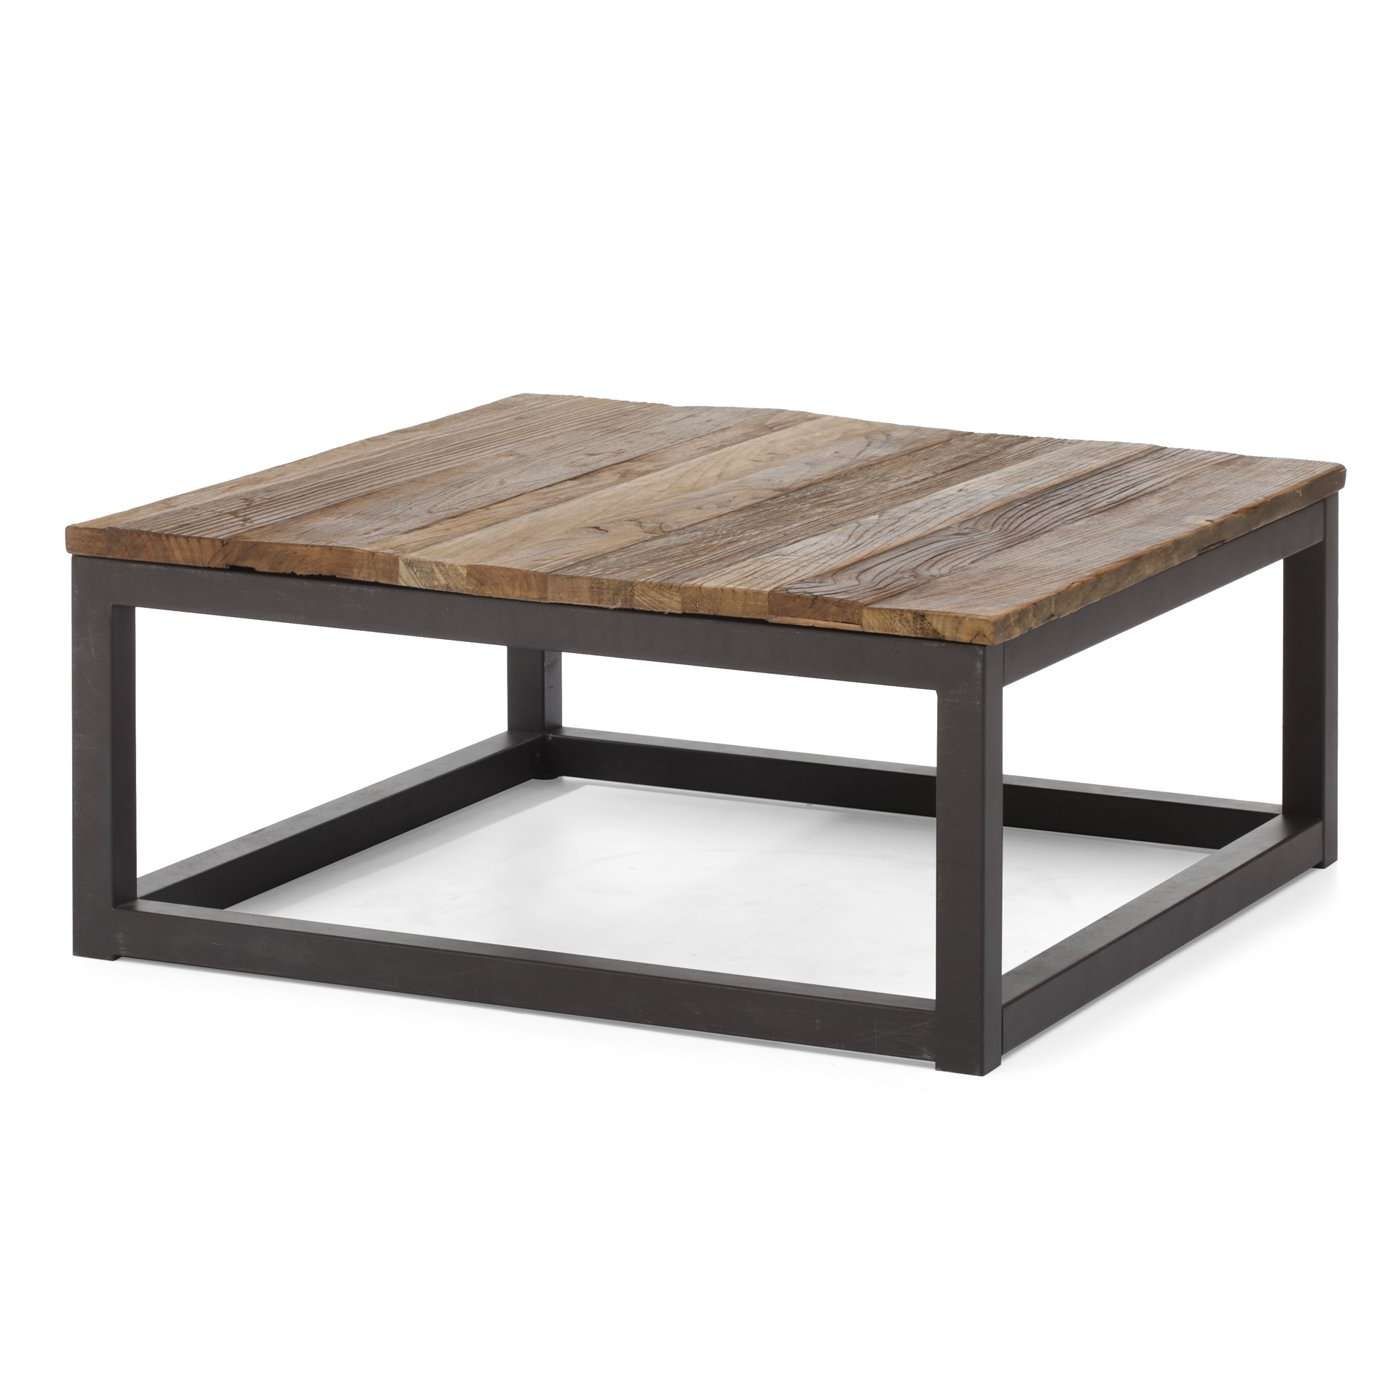 Most Up To Date Low Square Wooden Coffee Tables With Regard To Coffee Tables : Big Square Coffee Table Wood Large White With (View 17 of 20)